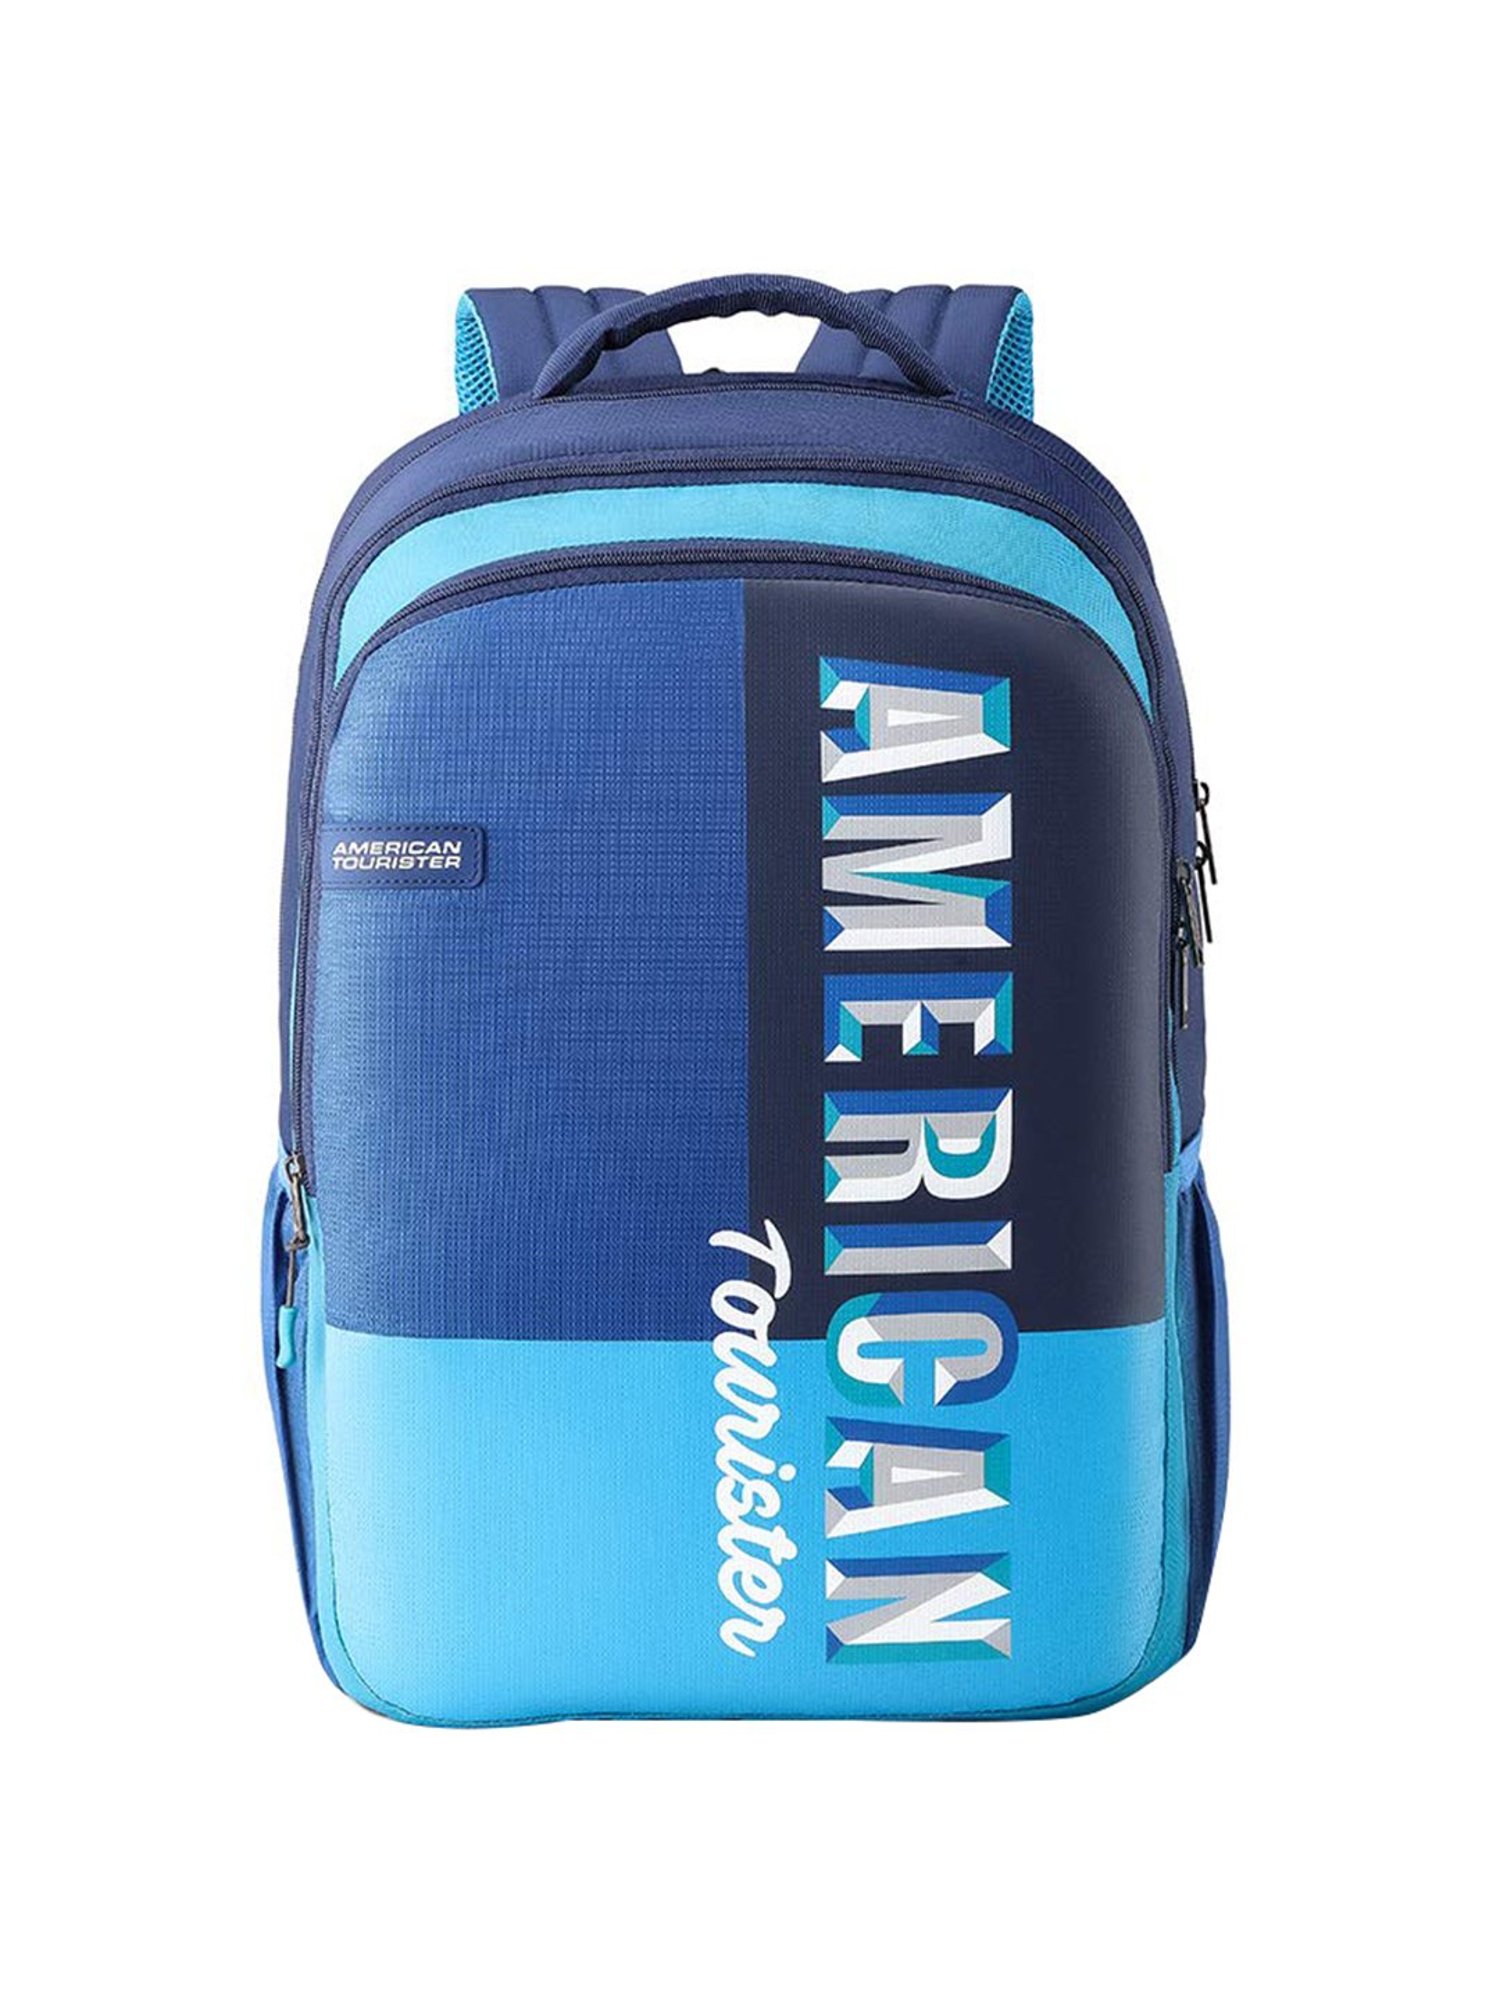 Buy AMERICAN TOURISTER HERD Backpack at the best price in Mauritius|  Mycart.mu